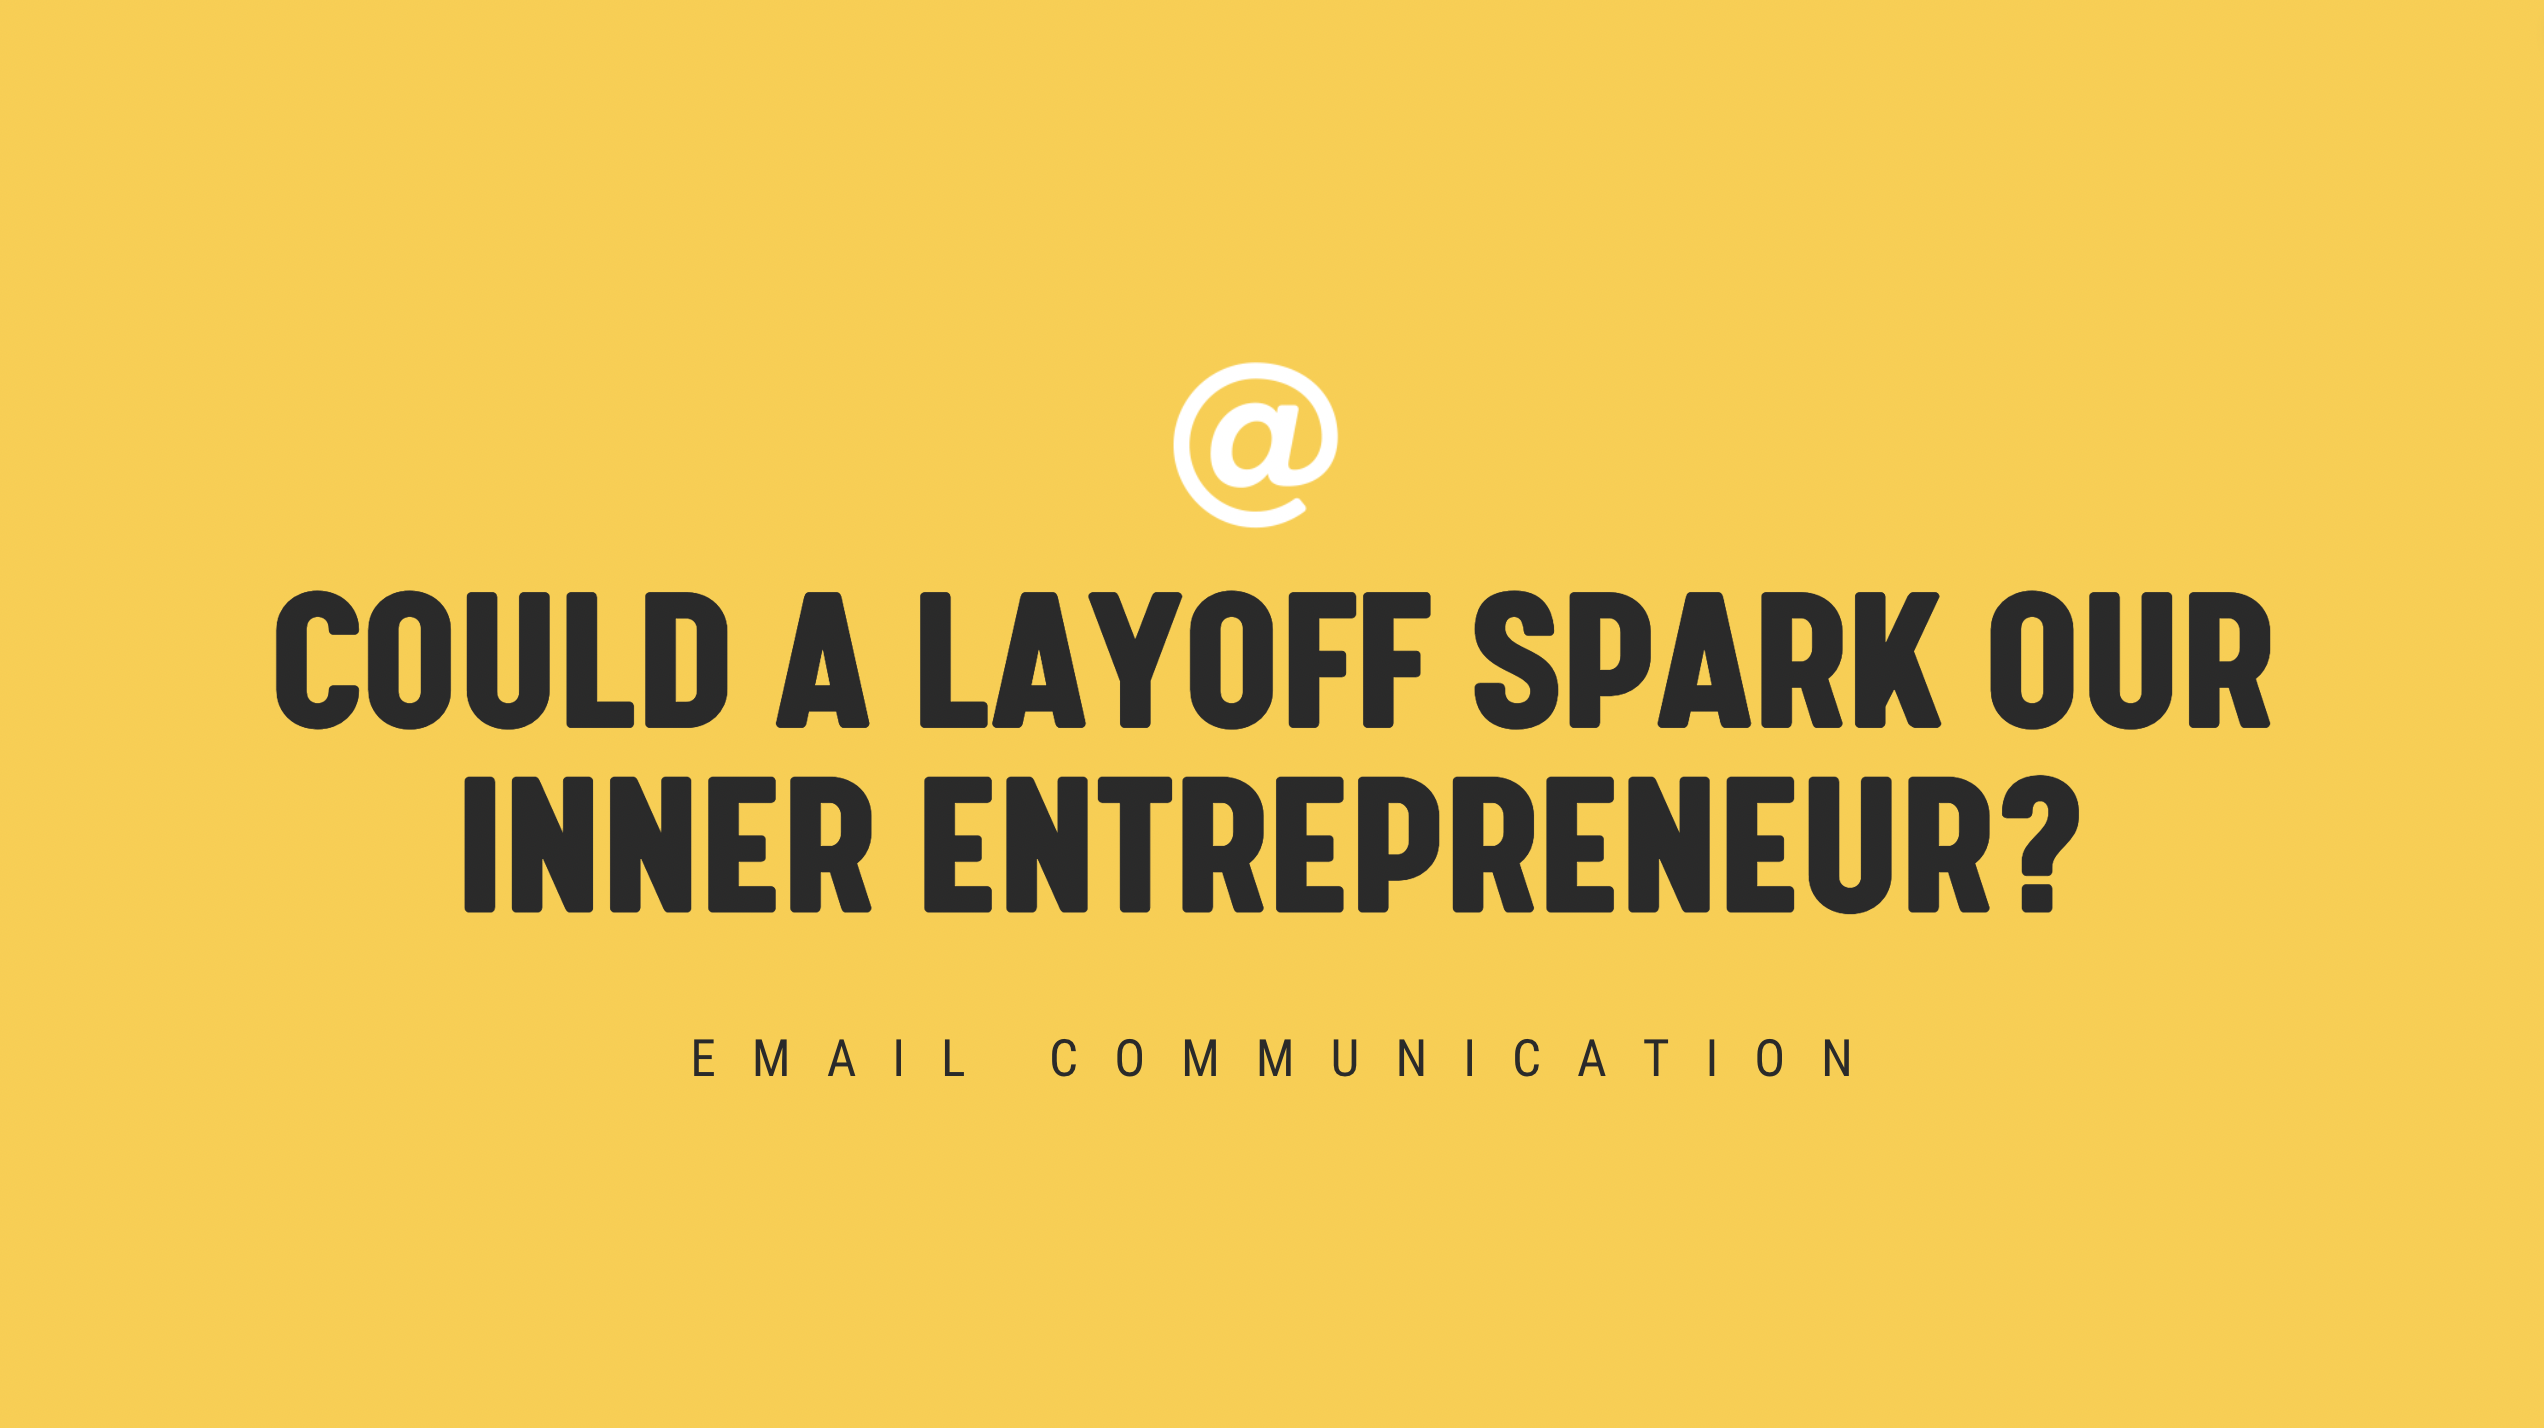 [NEW] Could a Layoff Spark Our Inner Entrepreneur? - Single Email